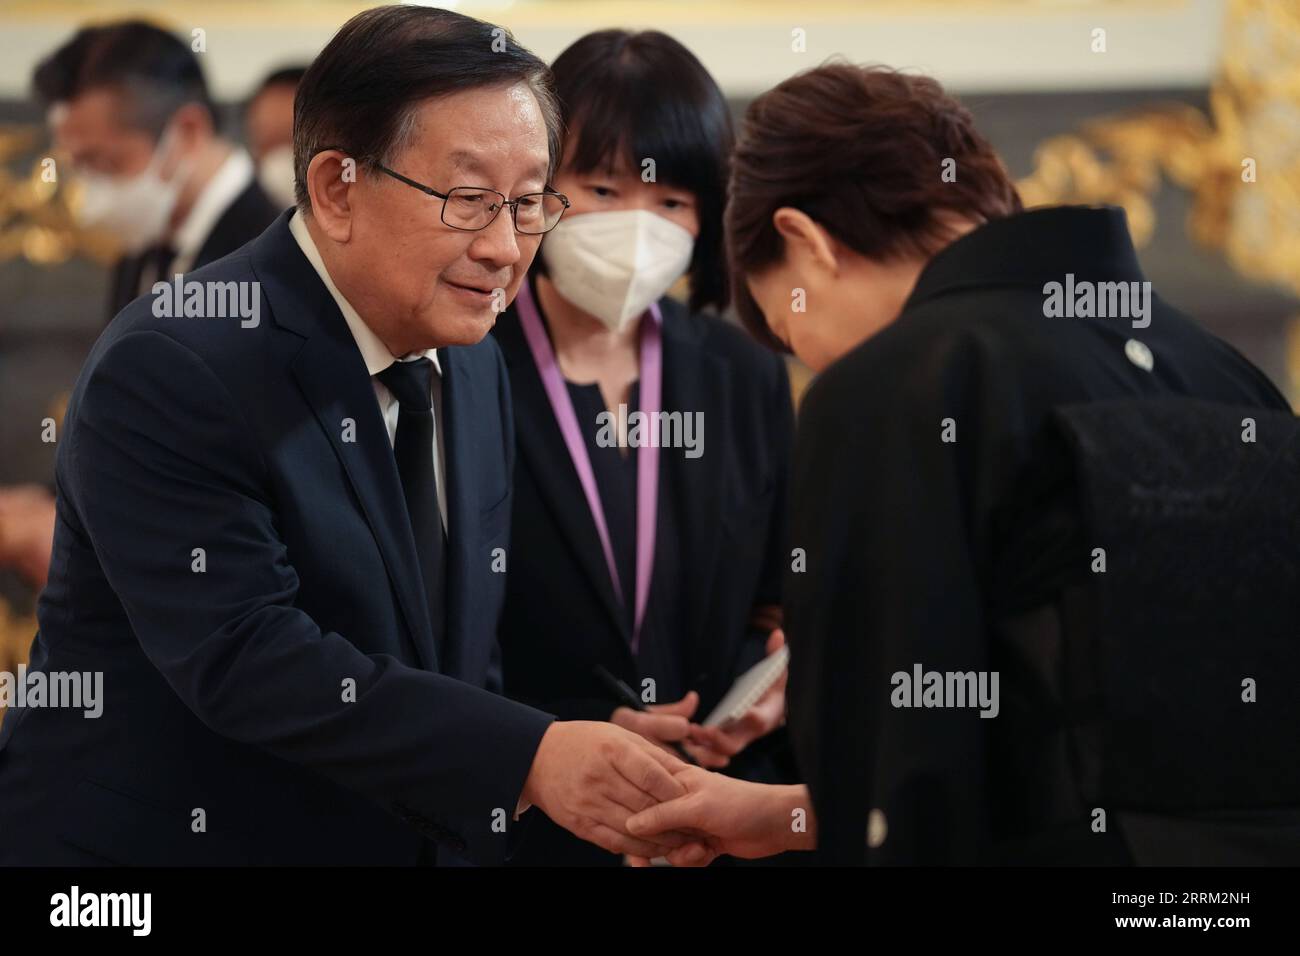 220928 -- TOKYO, Sept. 28, 2022 -- Wan Gang L, representative of the Chinese government and vice chairman of the National Committee of the Chinese People s Political Consultative Conference, shakes hands with former Japanese Prime Minister Shinzo Abe s wife Akie Abe during the appreciation ceremony hosted by the Japanese government and Abe s family in Tokyo, Japan, Sept. 27, 2022.  JAPAN-TOKYO-ABE S FUNERAL ZhangxXiaoyu PUBLICATIONxNOTxINxCHN Stock Photo